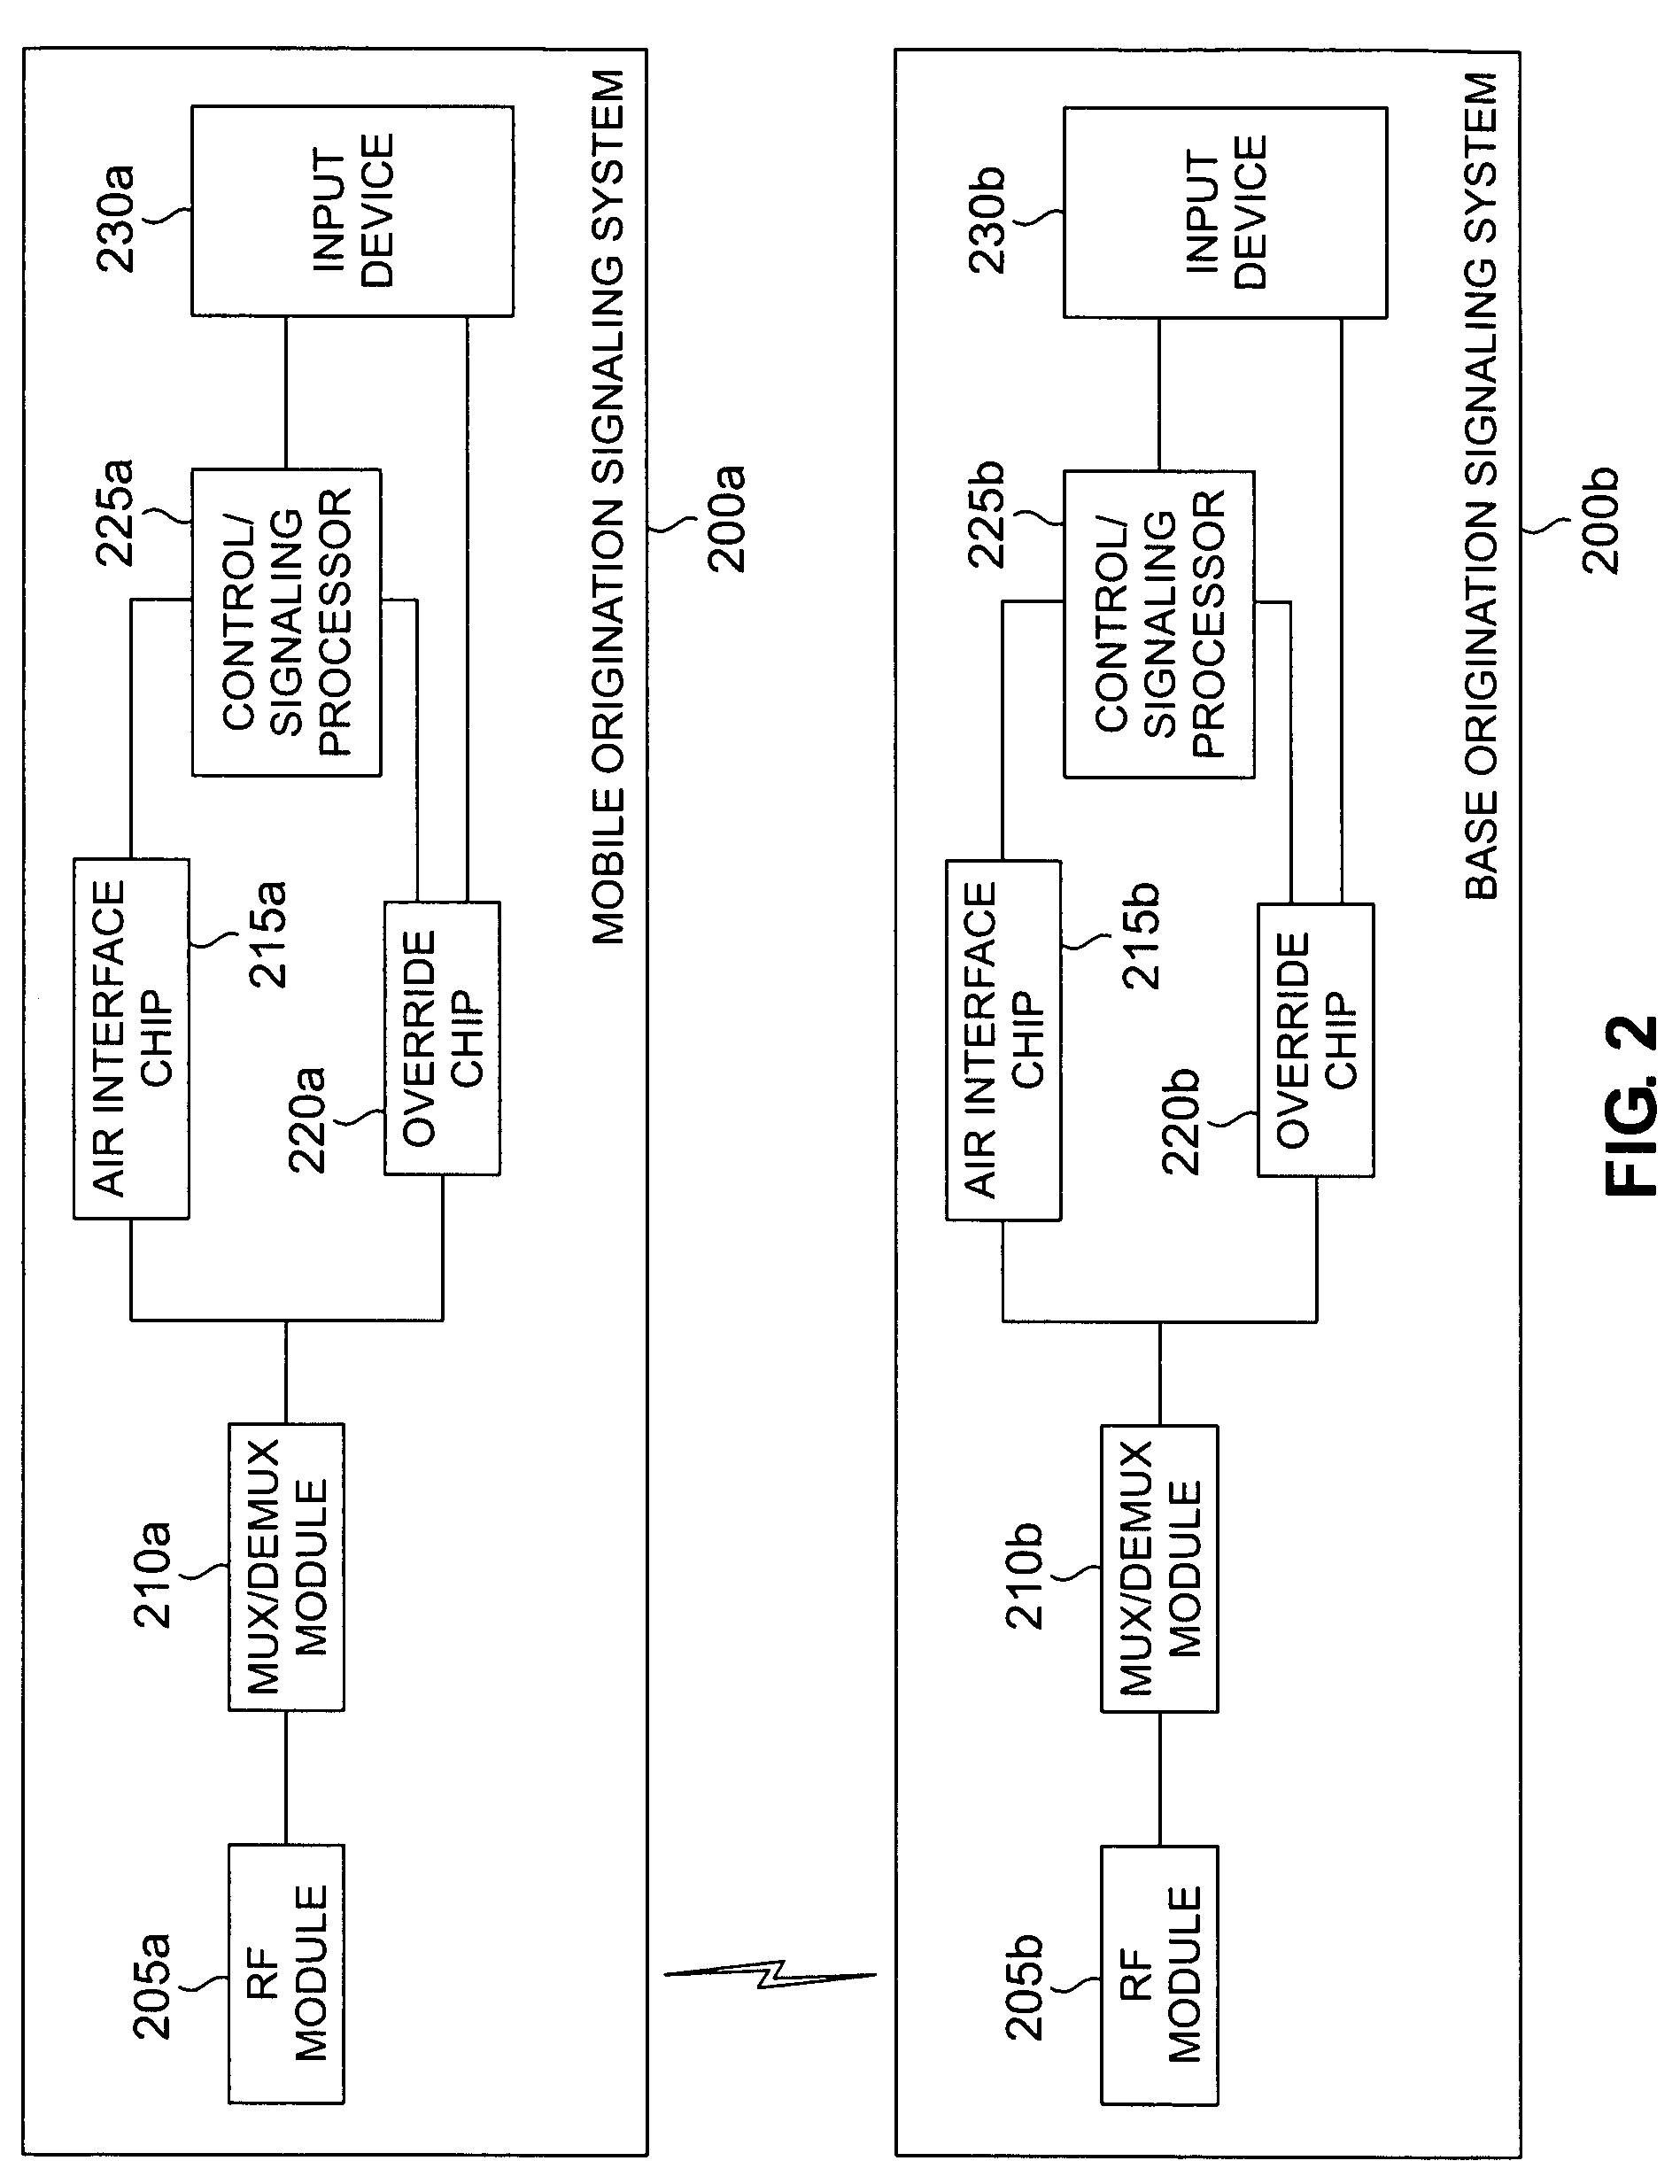 Method and system for origination signaling in a wireless network